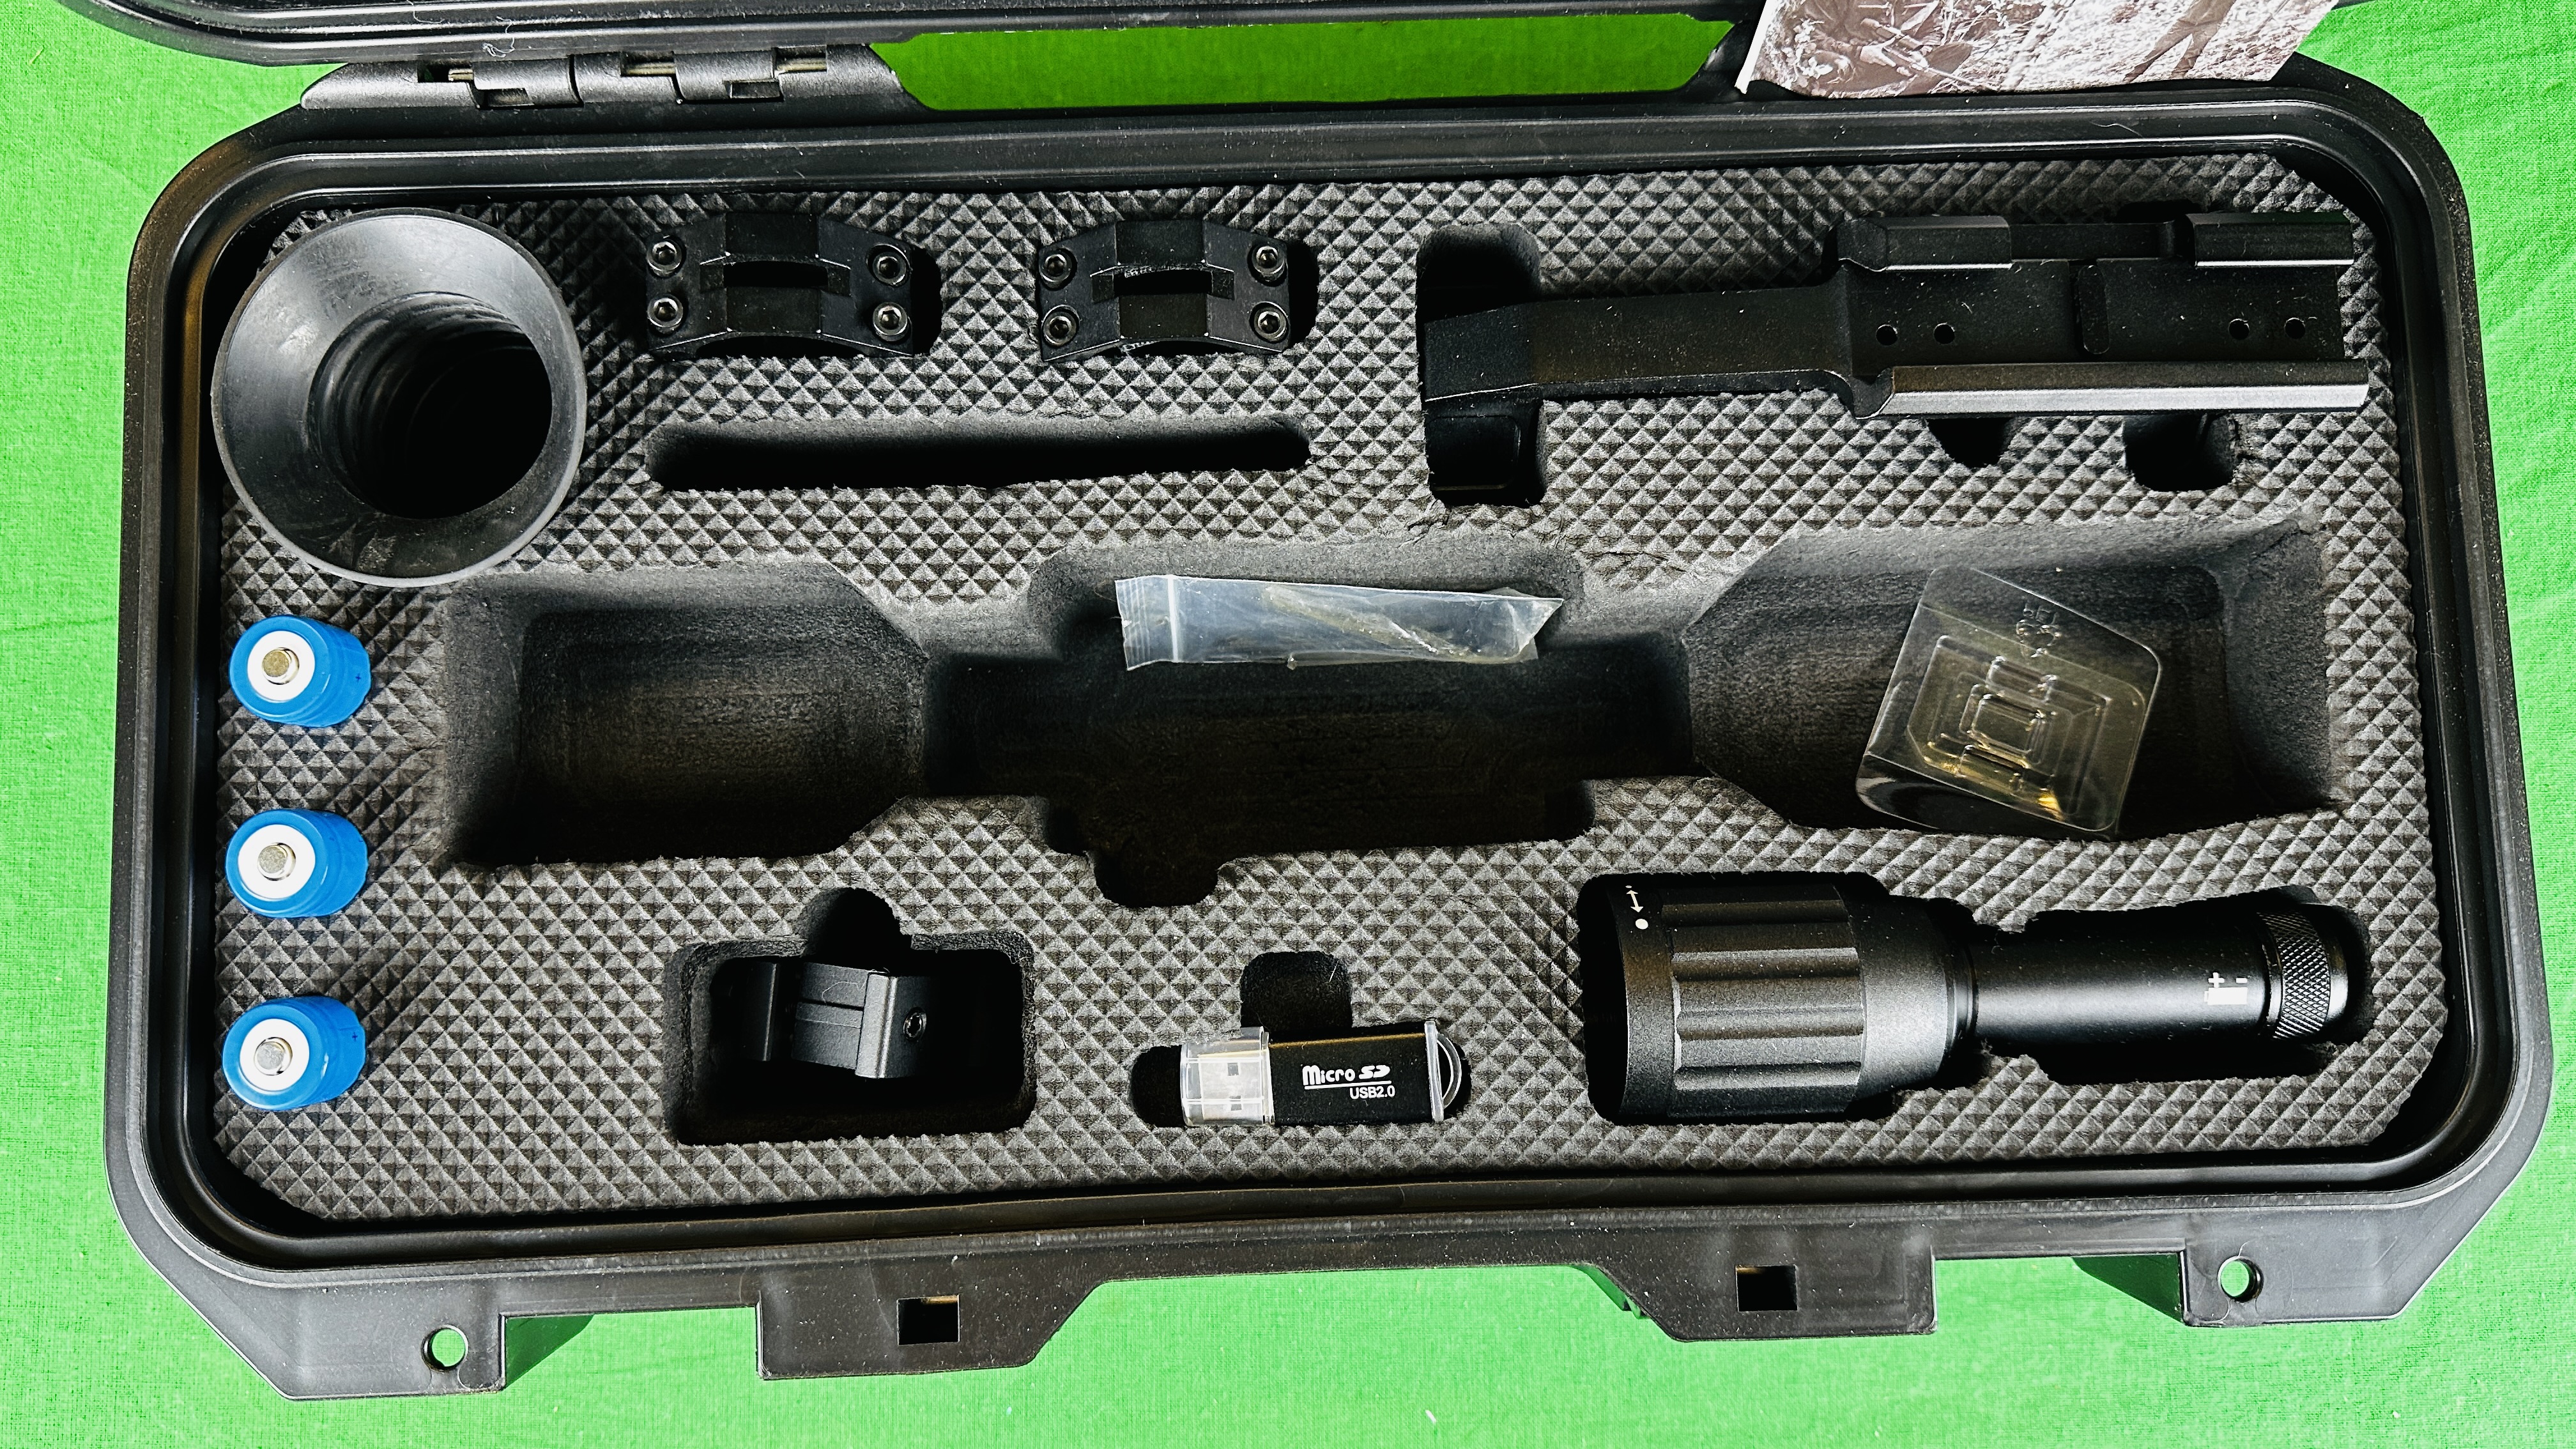 WULF 3-24X DAY/NIGHT VISION RIFLE SCOPE IN HARD SHELL CARRY CASE WITH ACCESSORIES. - Image 14 of 24